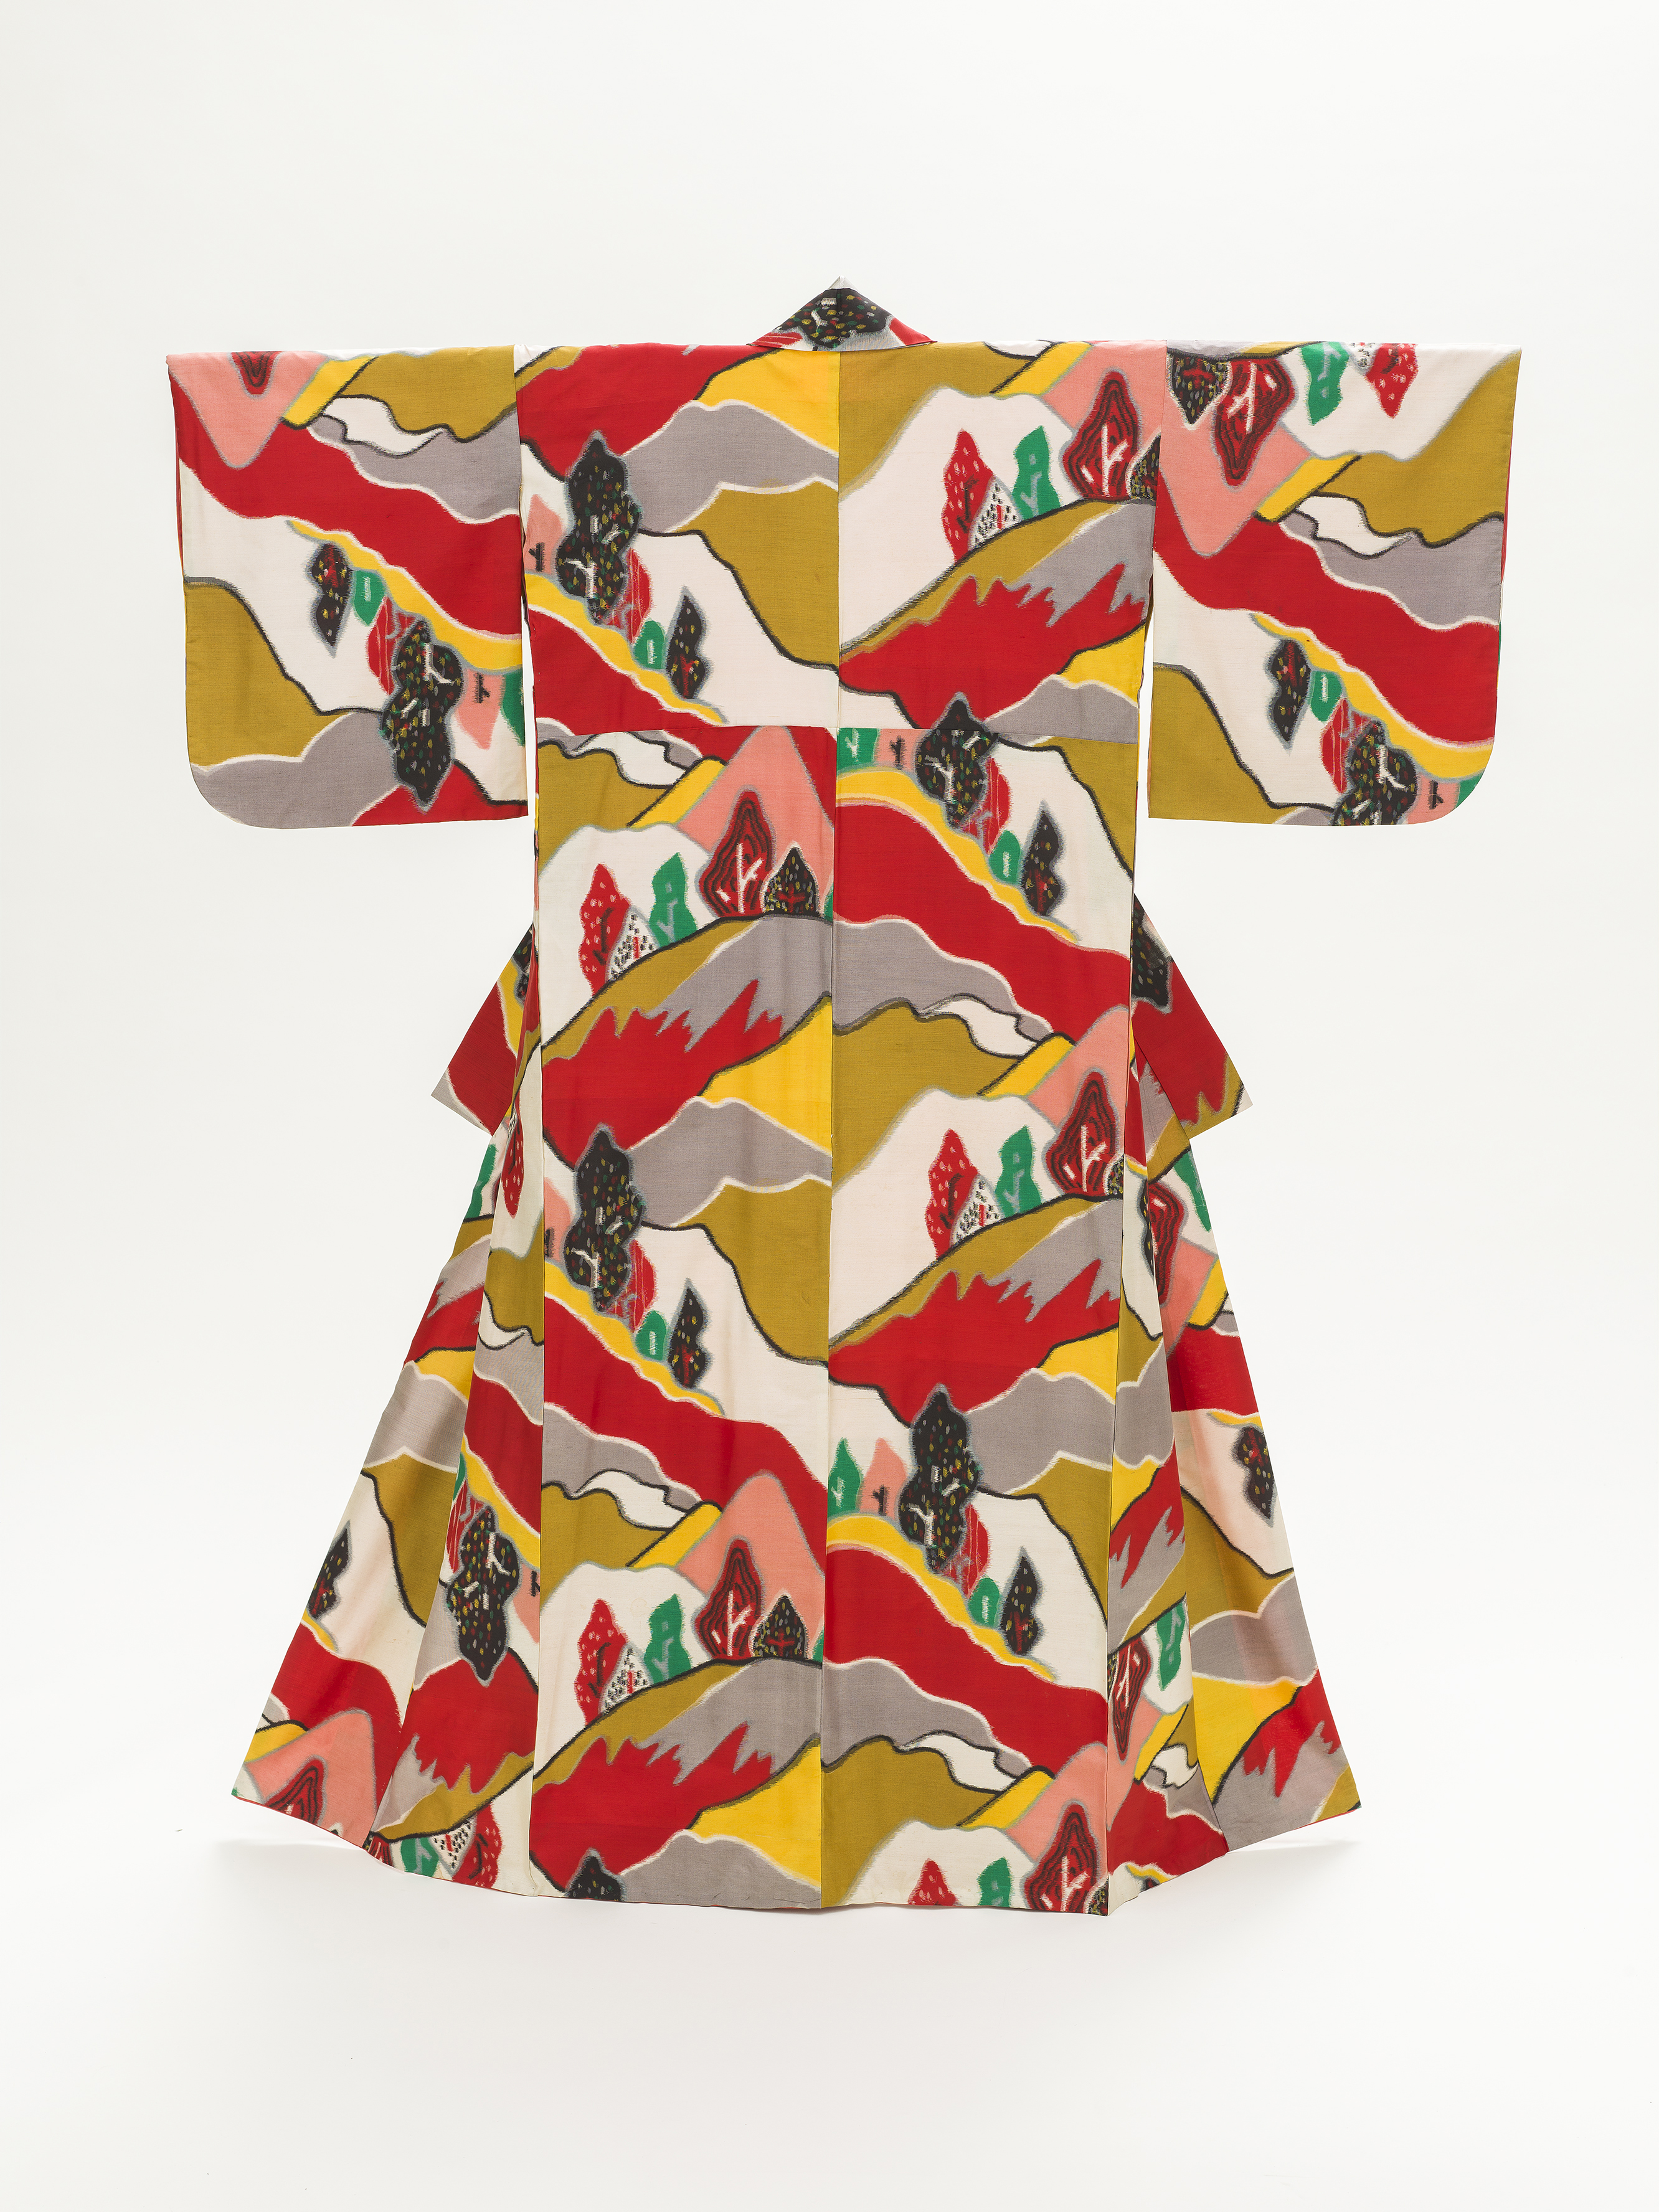 Woman's Kimono with Mountain Landscape, Japan, Taishō (1912–26)–mid-Shōwa period (1926–89), c. 1940, purchased with funds provided by Jacqueline Avant, photo © 2014 Museum Associates/LACMA